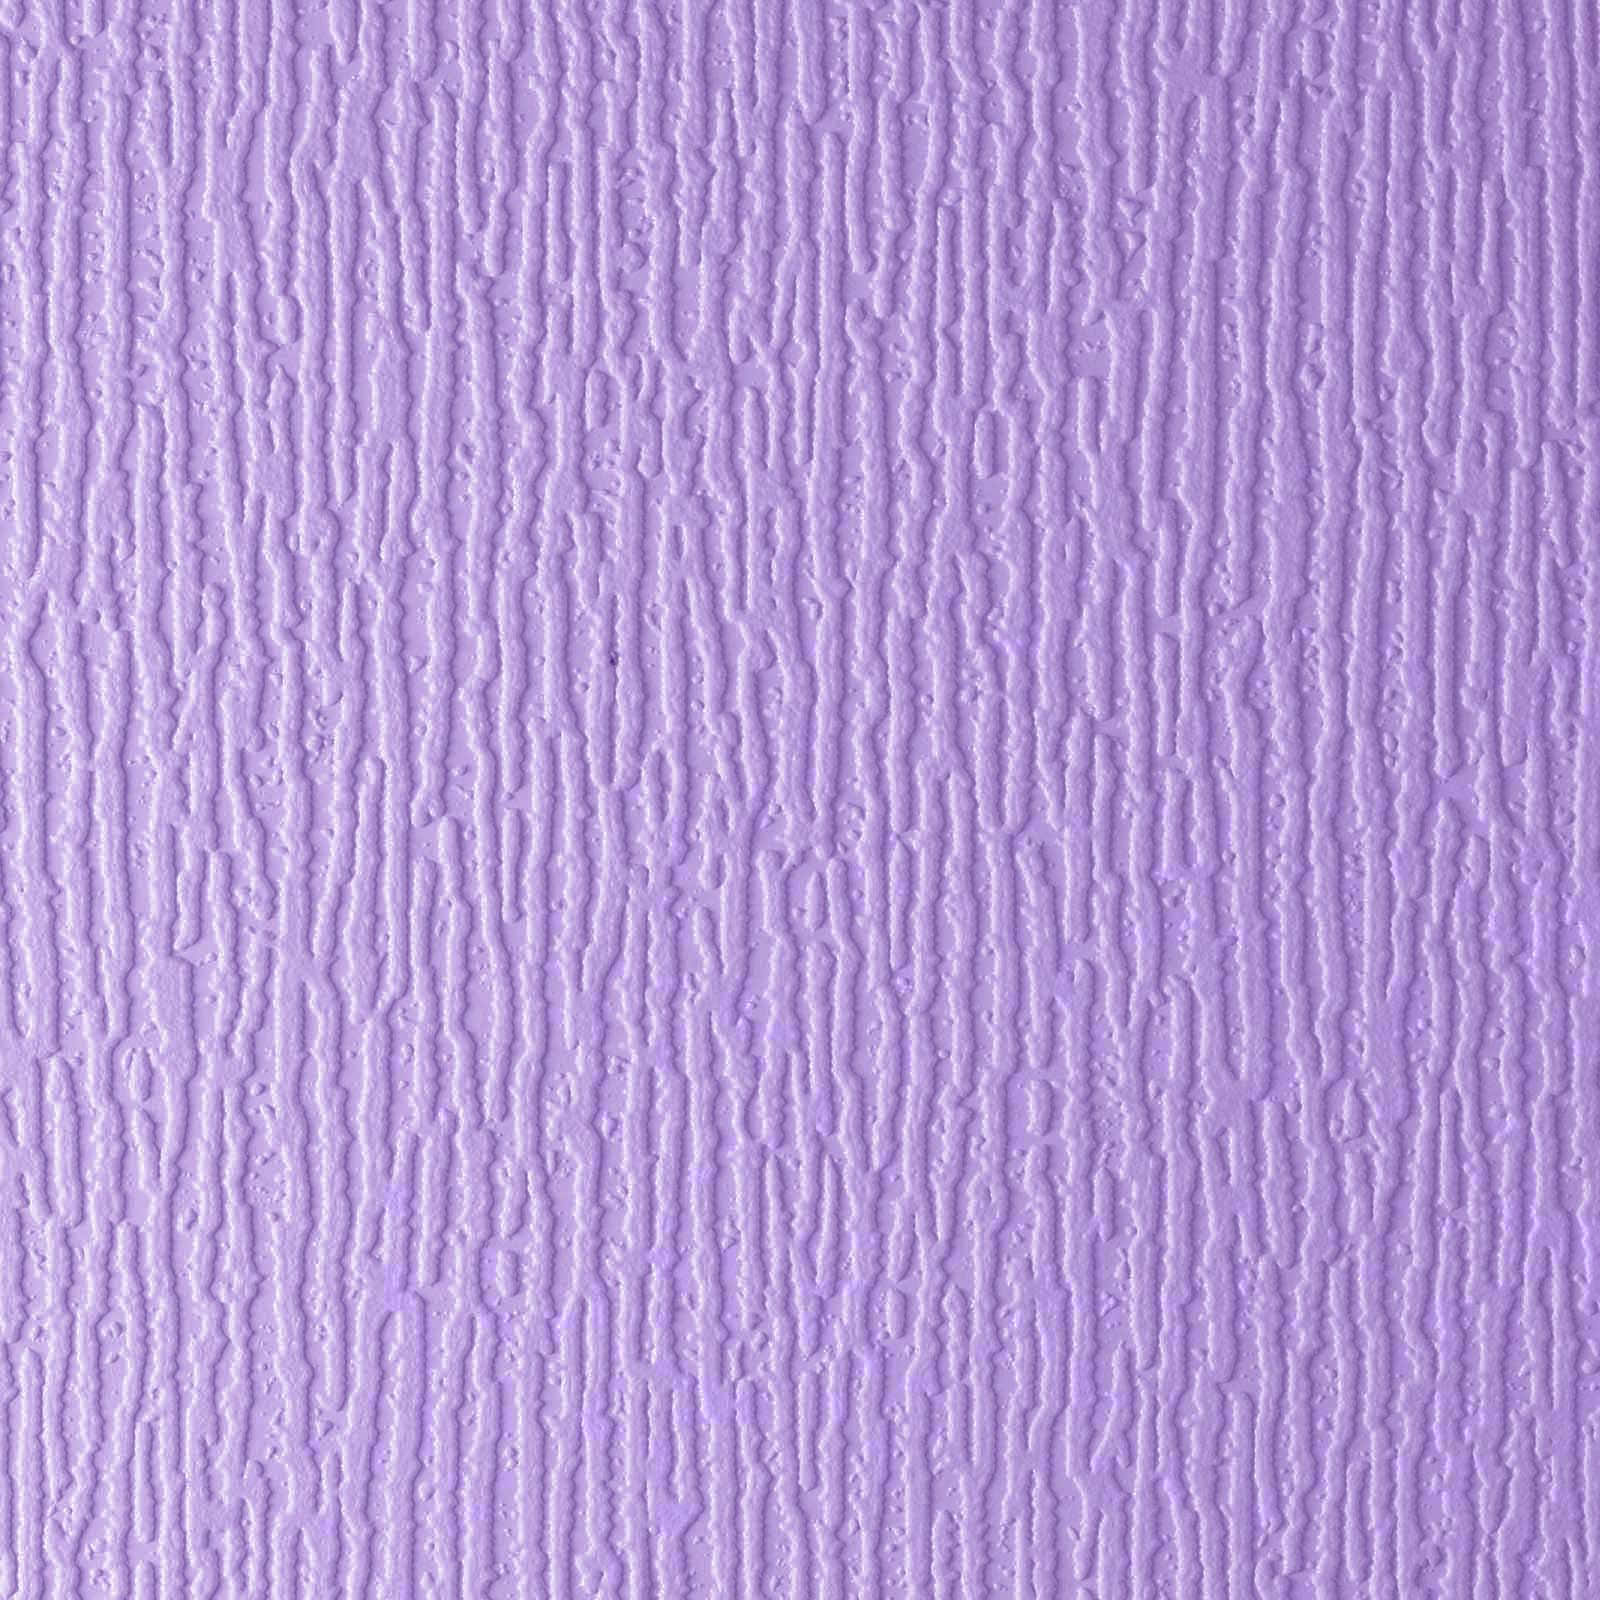 Lavender Purple Wall With Ribbed Texture Wallpaper